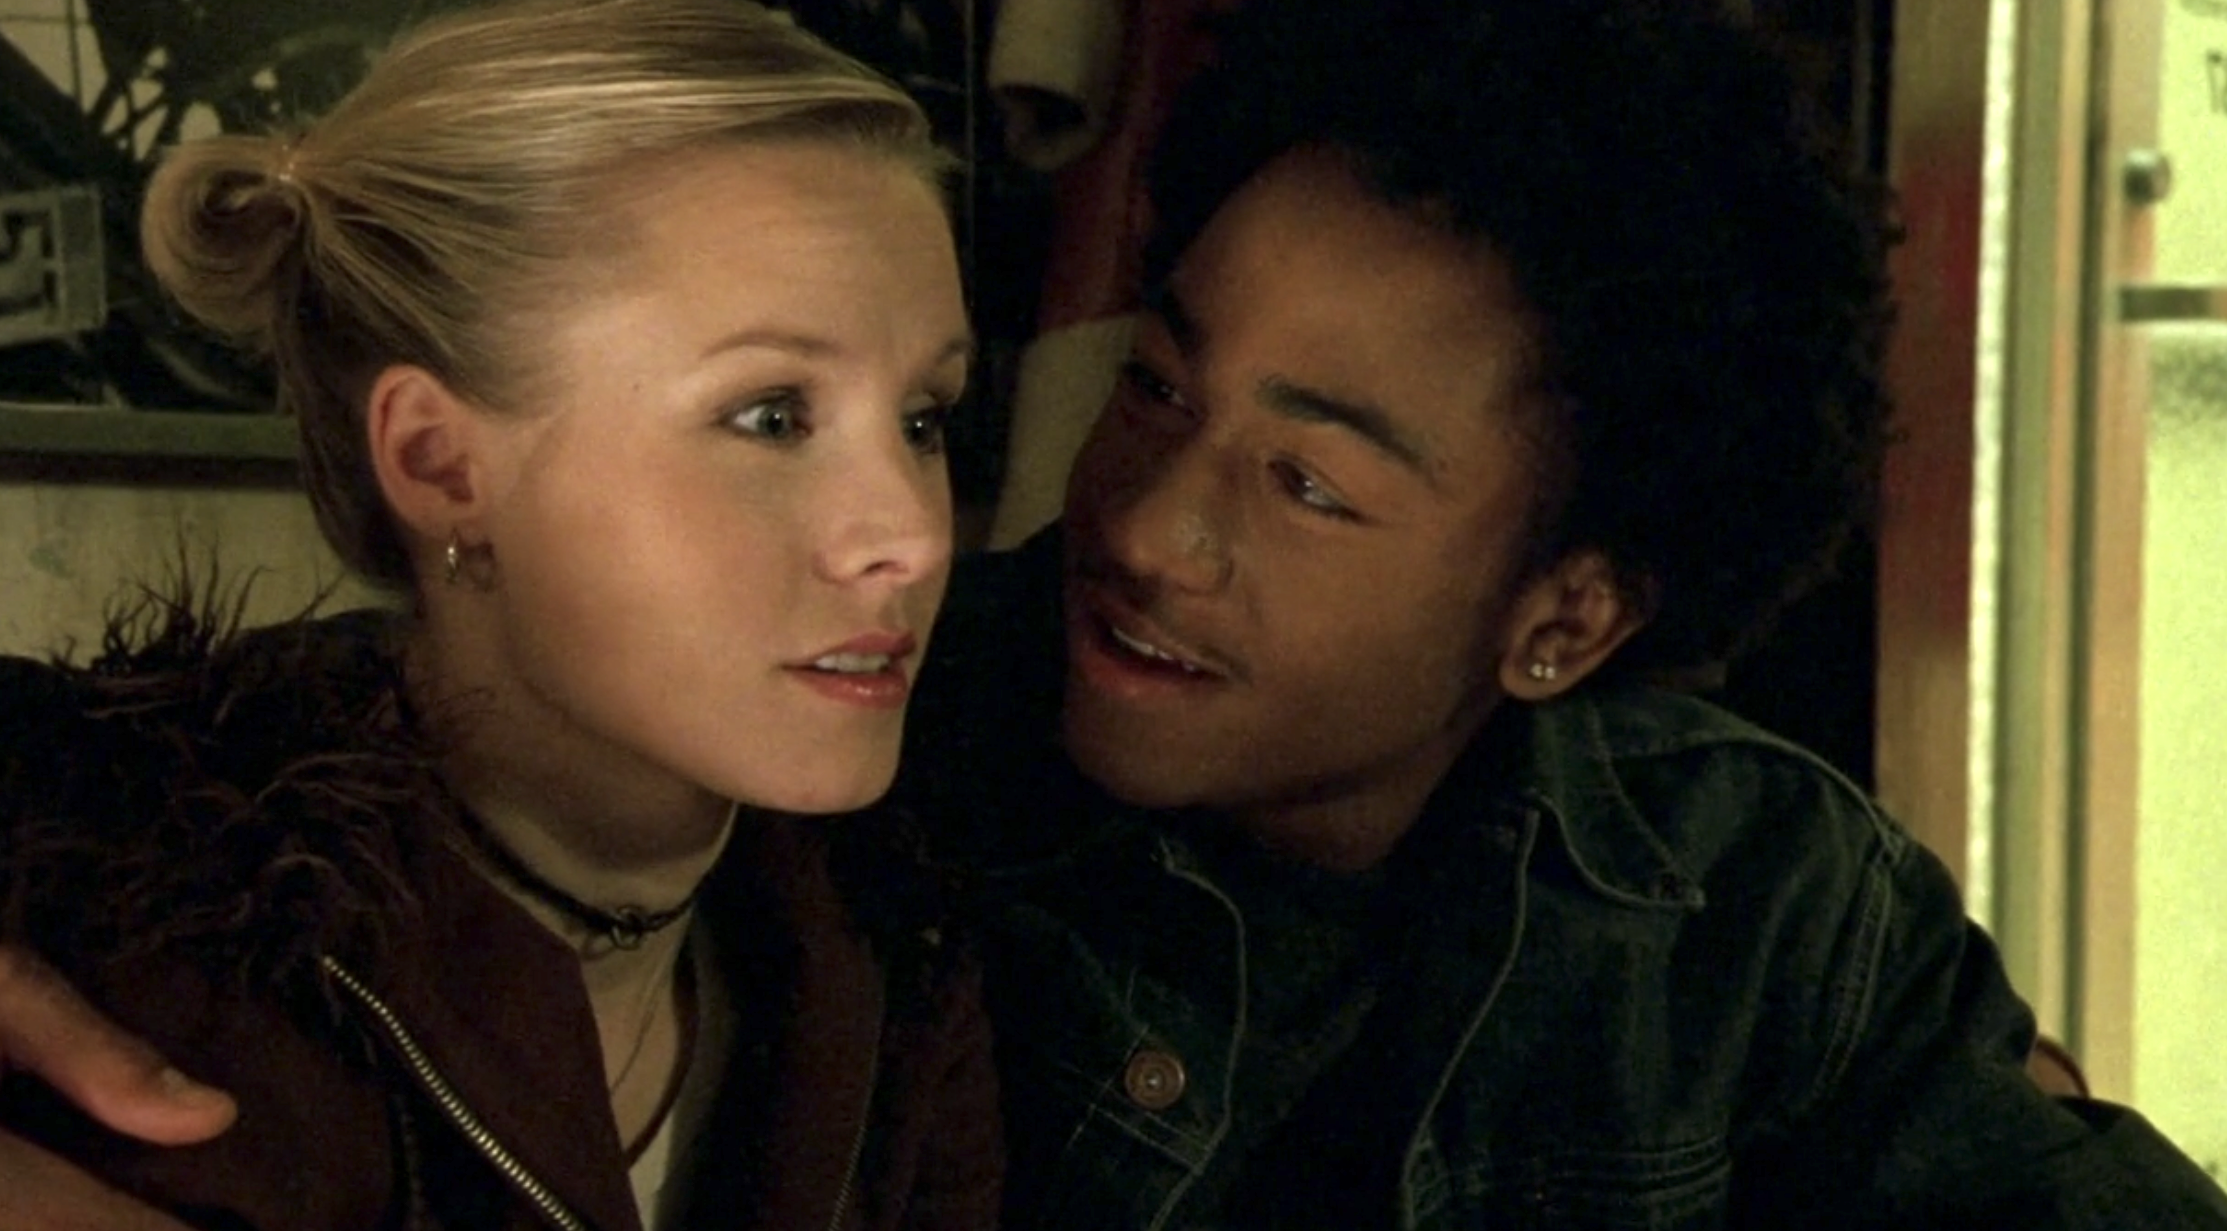 Screenshot from S1E12 of Veronica Mars. Wallace and Veronica are sitting side by side. Wallace has his arm around Veronica and is leaning in sayinng something and smiling. Veronica has a loook of playful shock on her face.